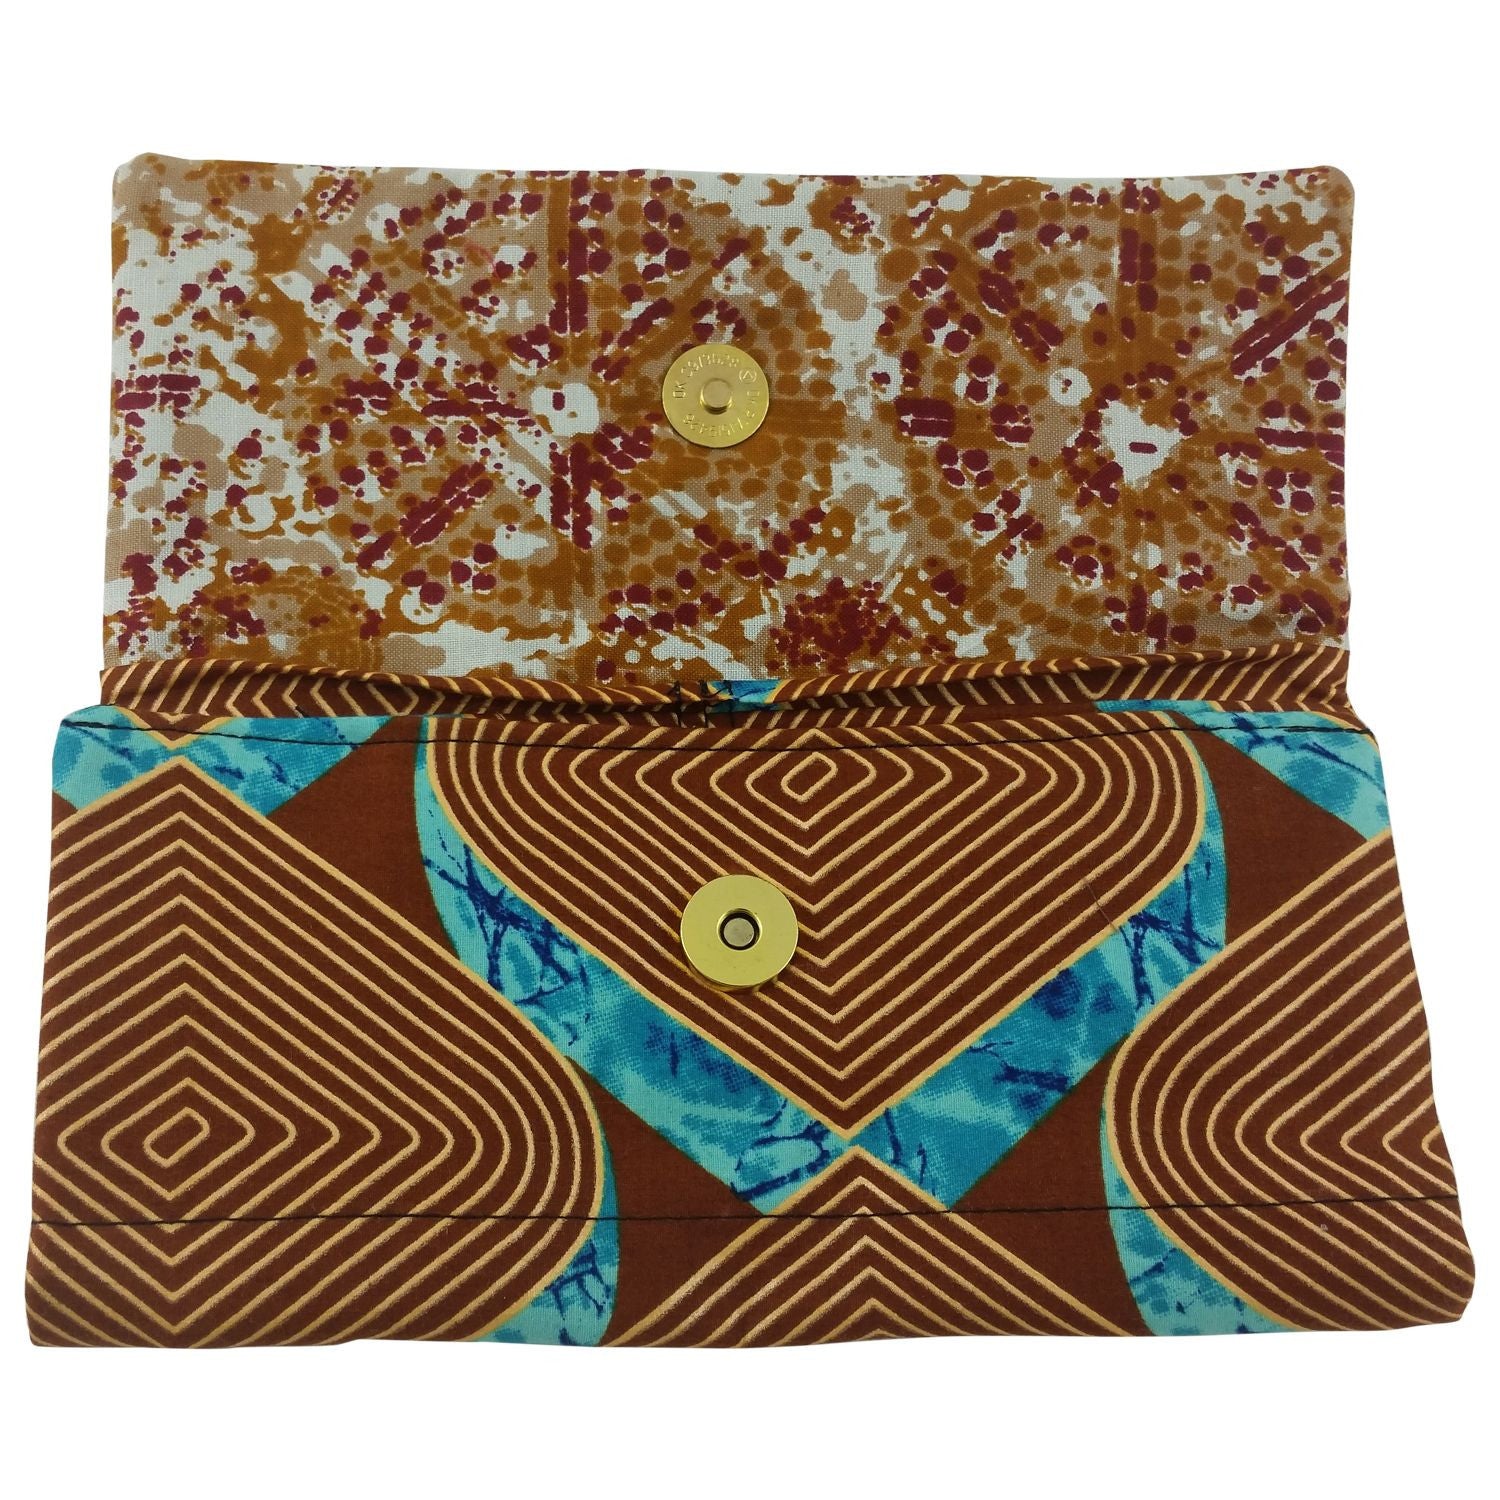 2 of 4: East African Kitenge Fabric Women's Wallet (Brown, Beige and Blue)